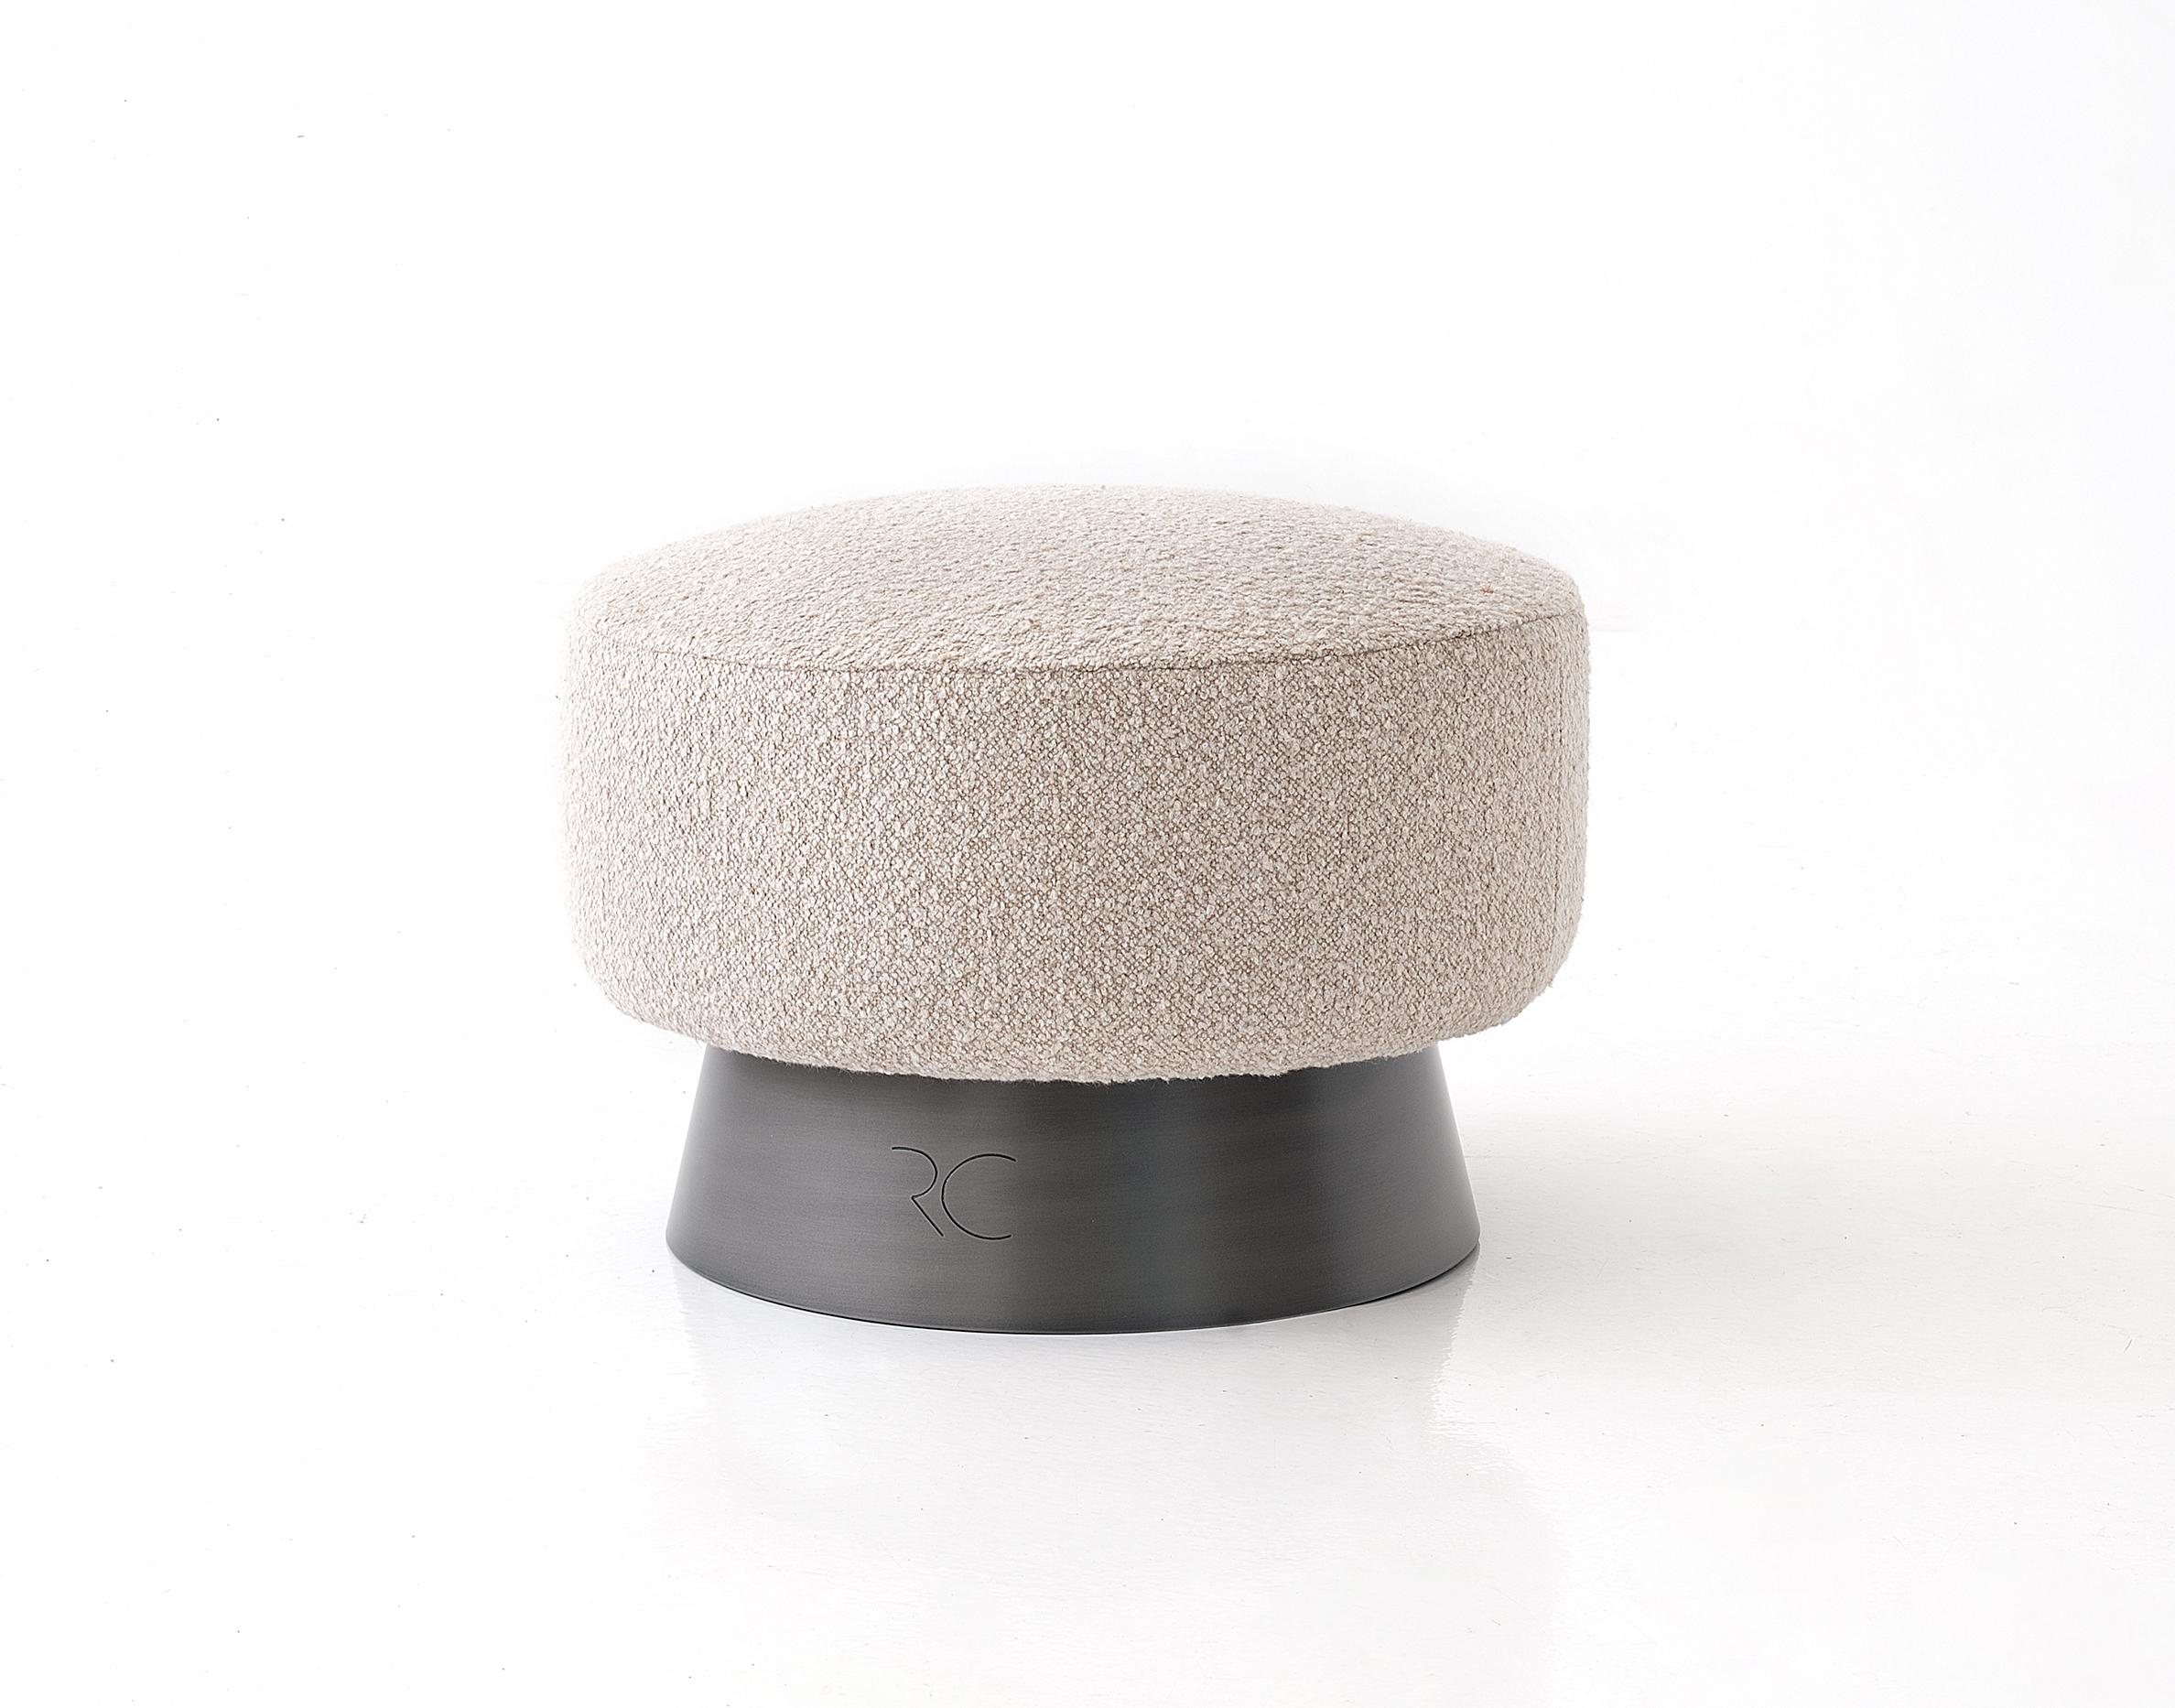 Rocco ottoman, simple and versatile 
Available in all Robicara fabrics and all metal patinas.